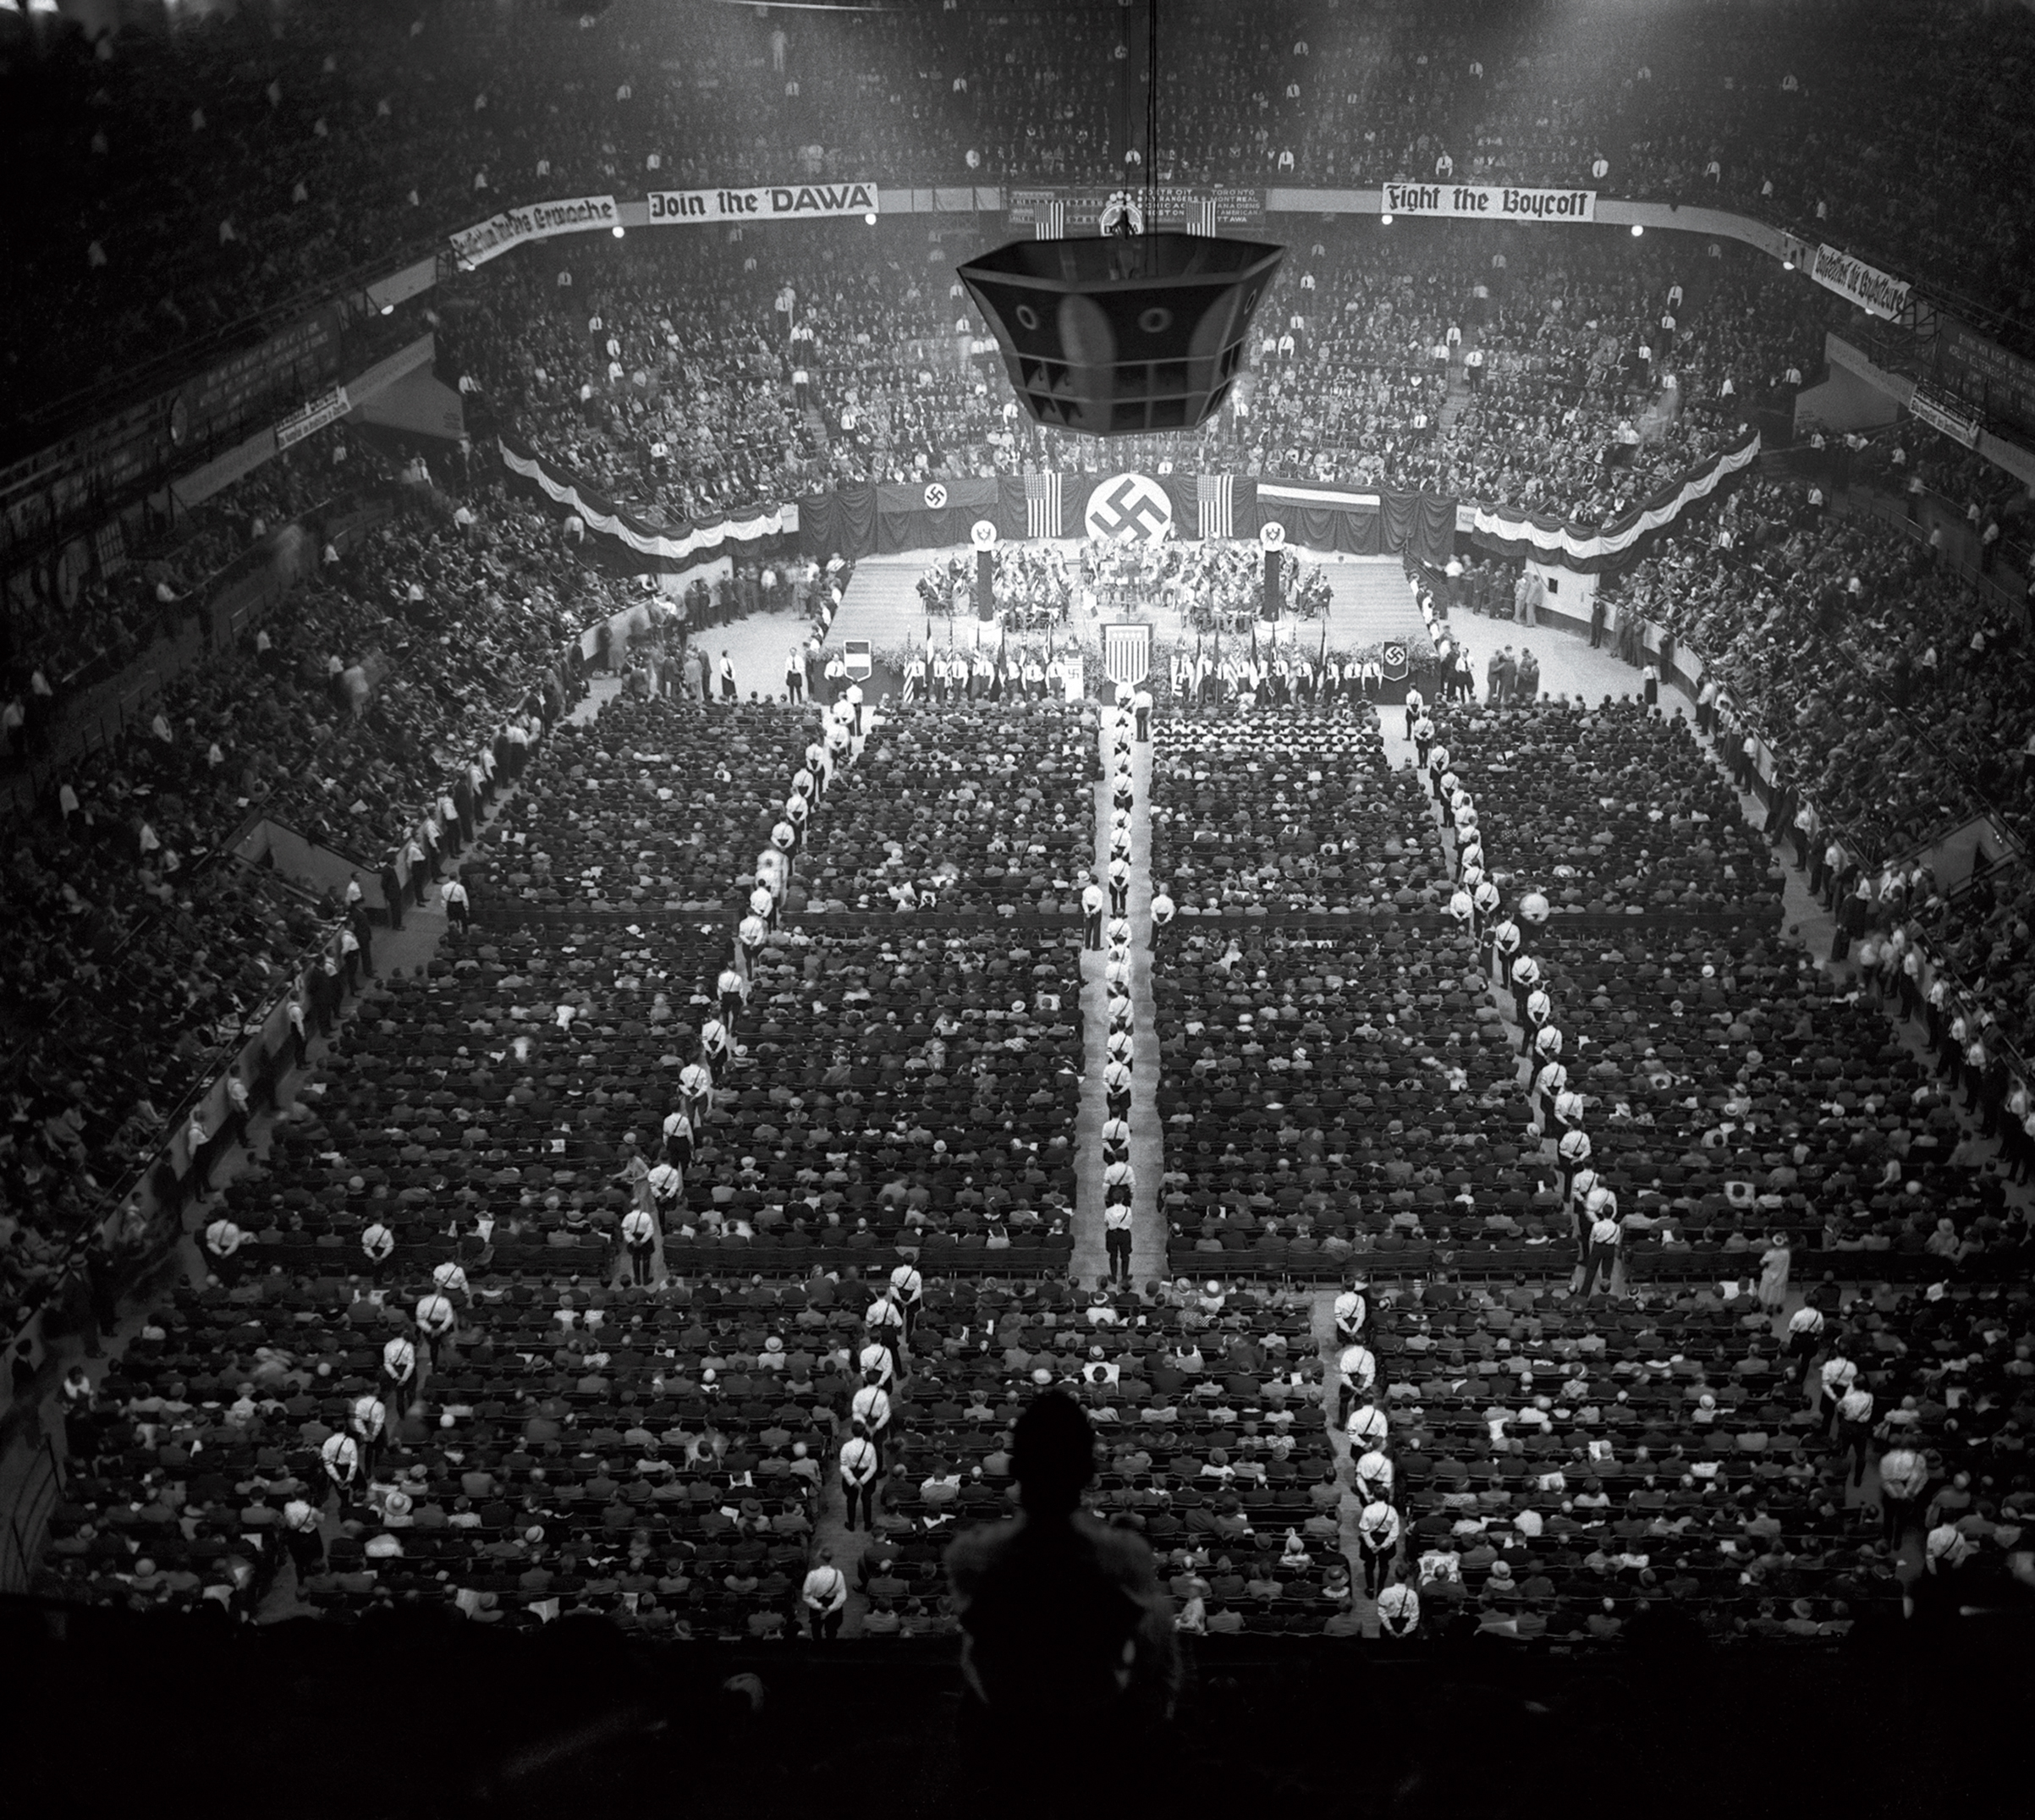 In 1934, some 20,000 people rallied for Friends of New Germany, a U.S. Nazi group, at Madison Square Garden (Bettmann/Getty Images)